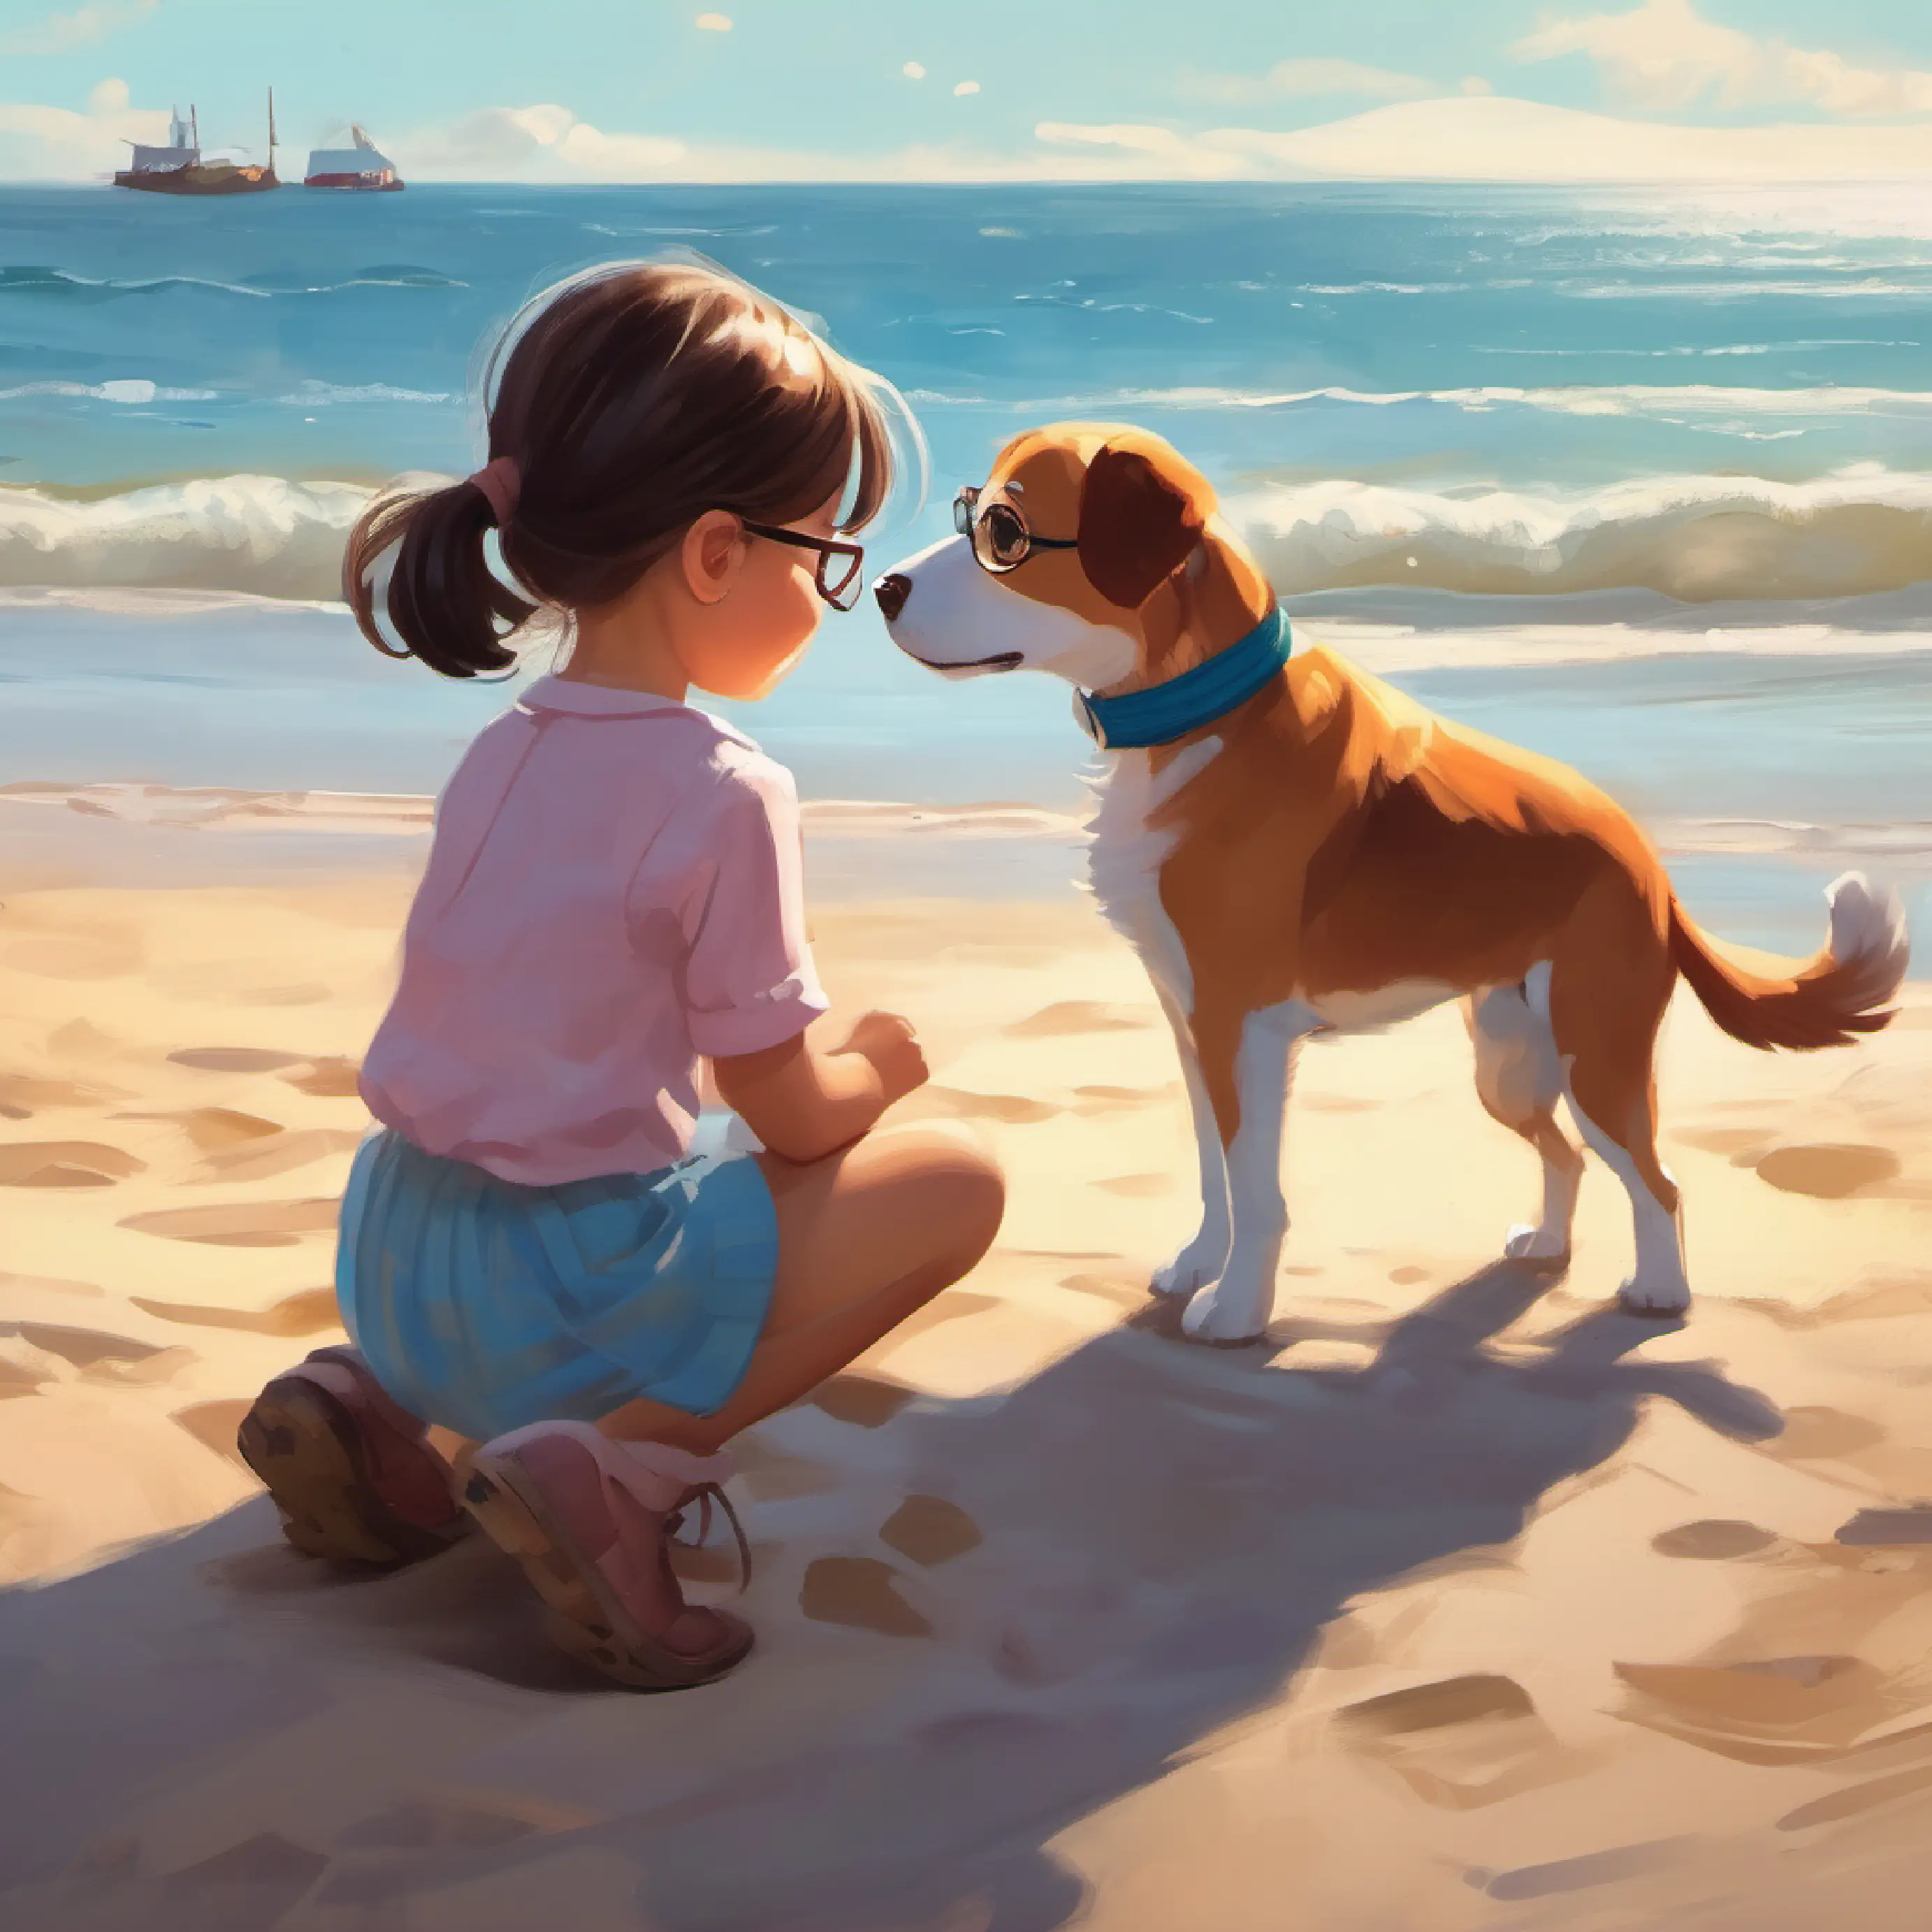 A little girl with glasses at the beach petting a dog